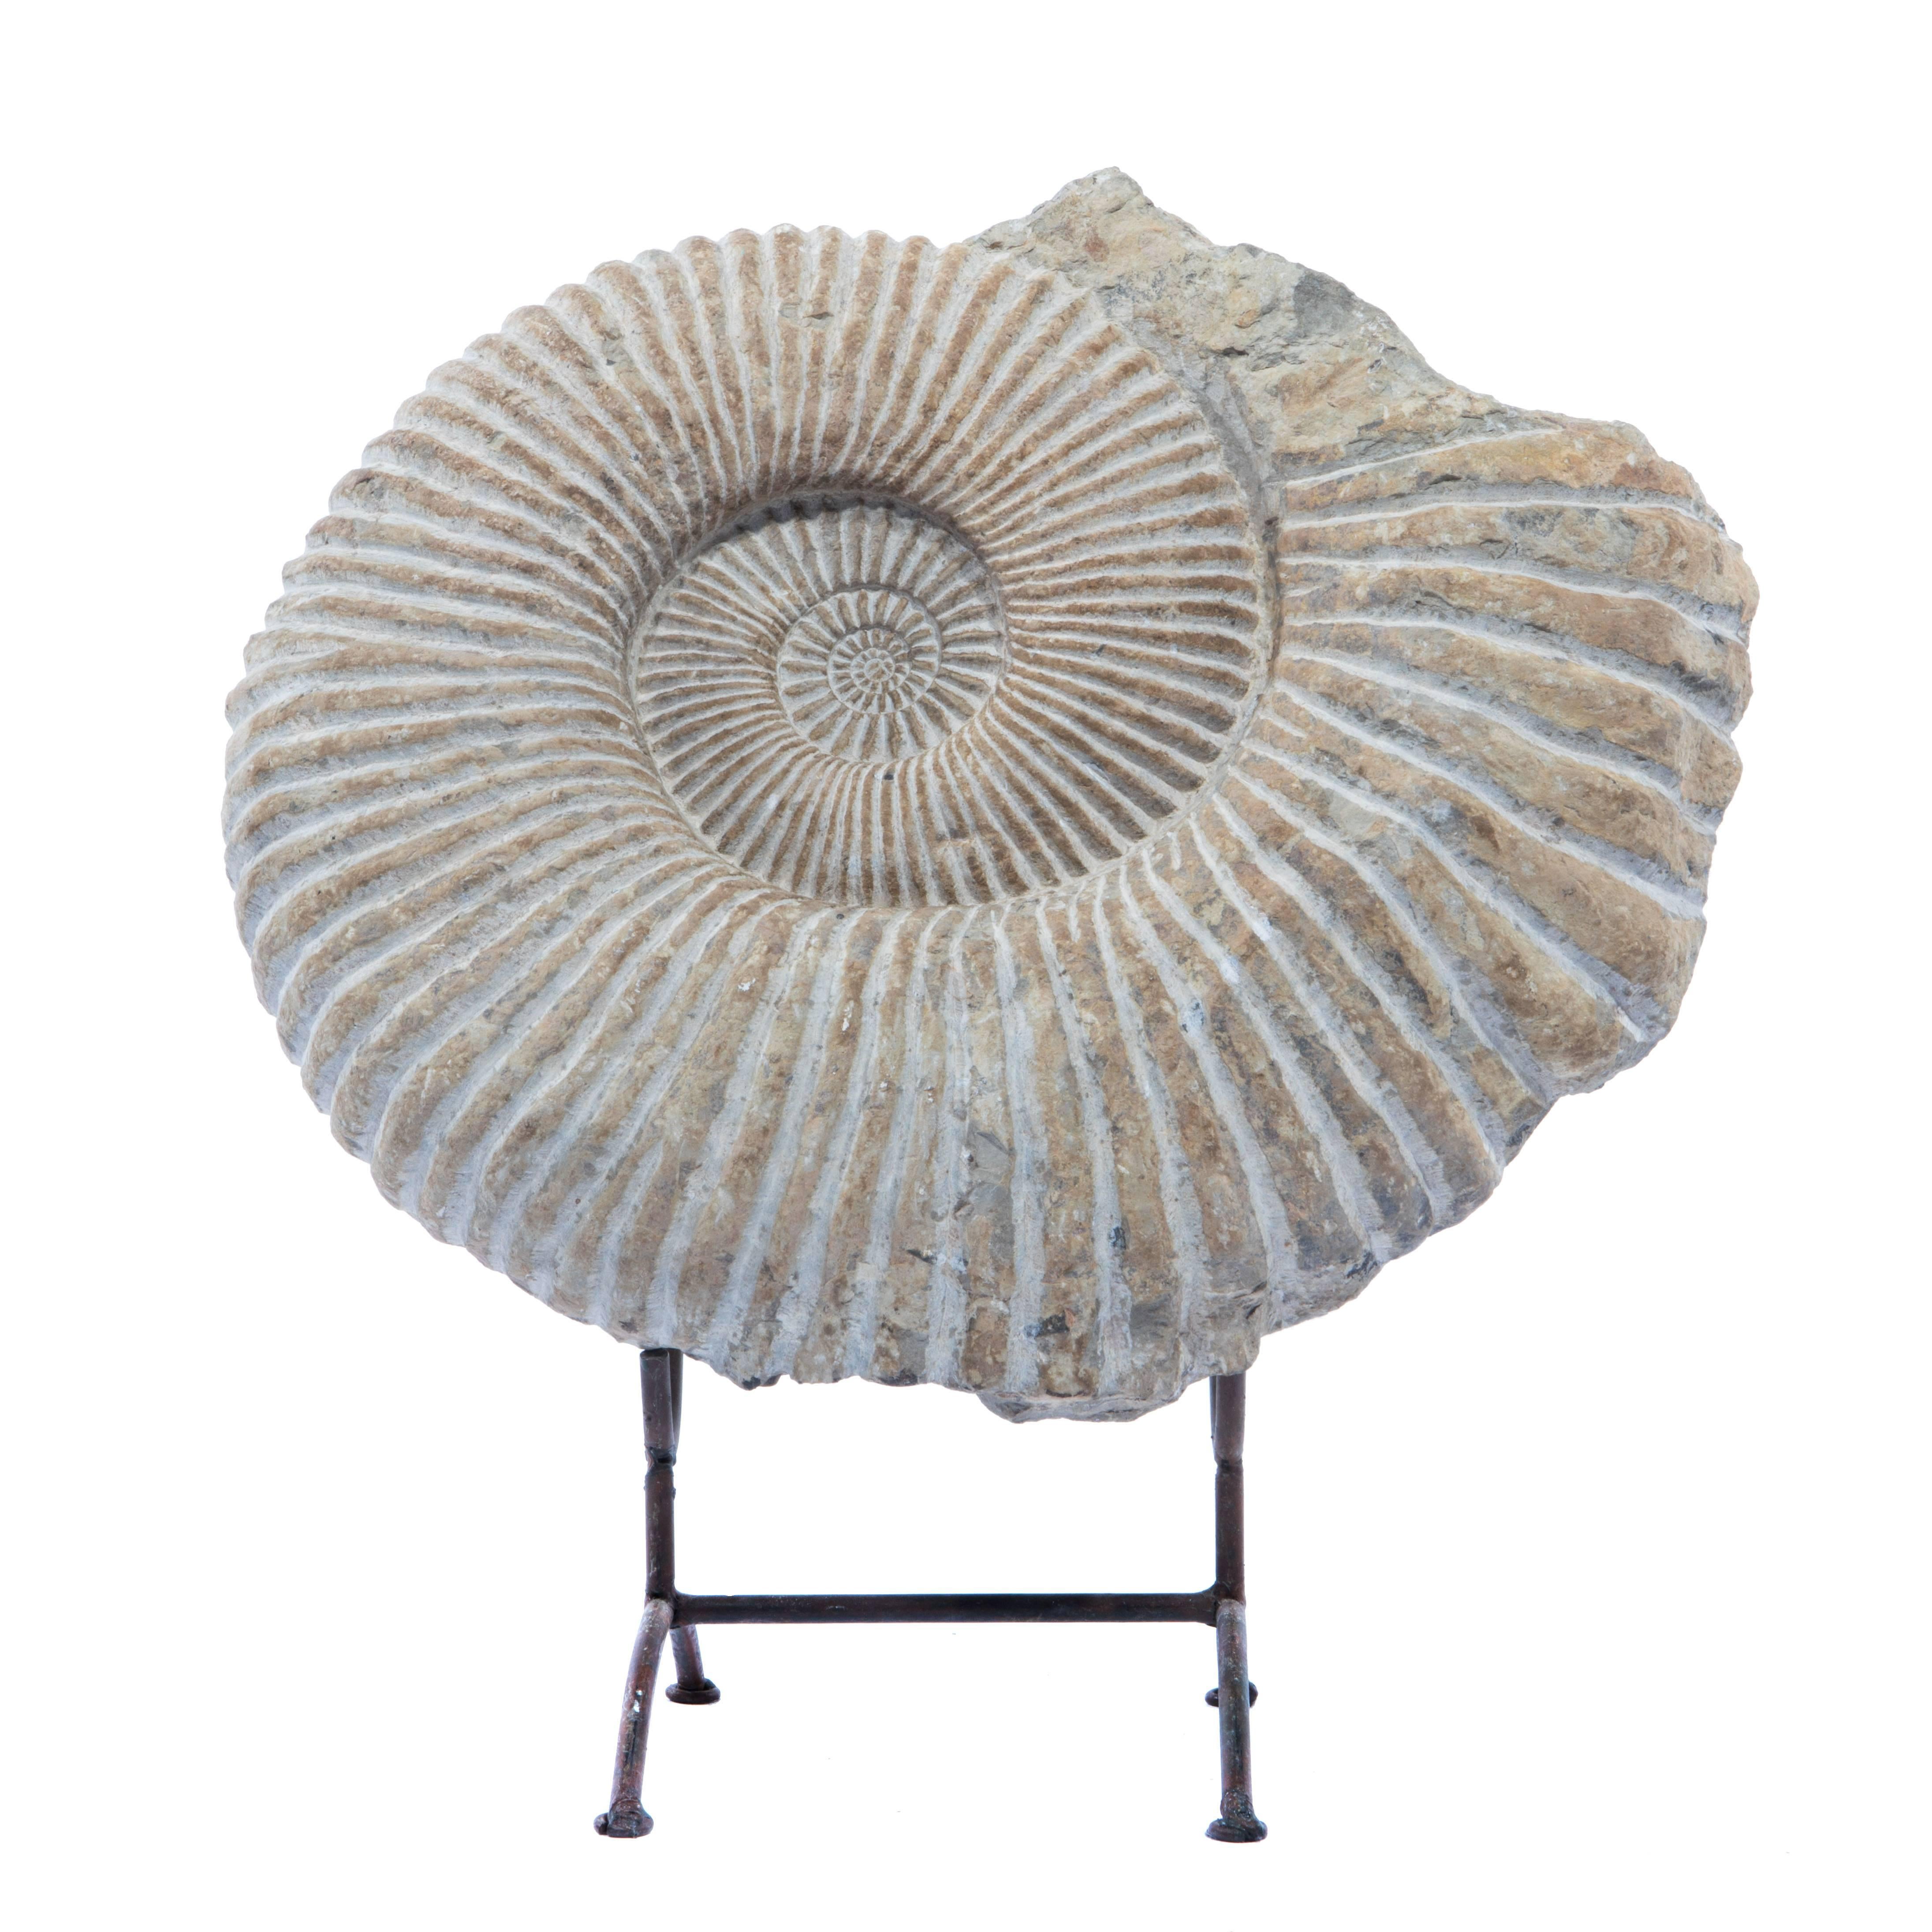 Beautiful ammonite fossil supported by a metal stand with four feet. This natural geometric form makes a wonderful sculptural accent. Ammonites are one of the best-known fossils, with ribbed, spiral-form shells. These sea creatures lived 240 million